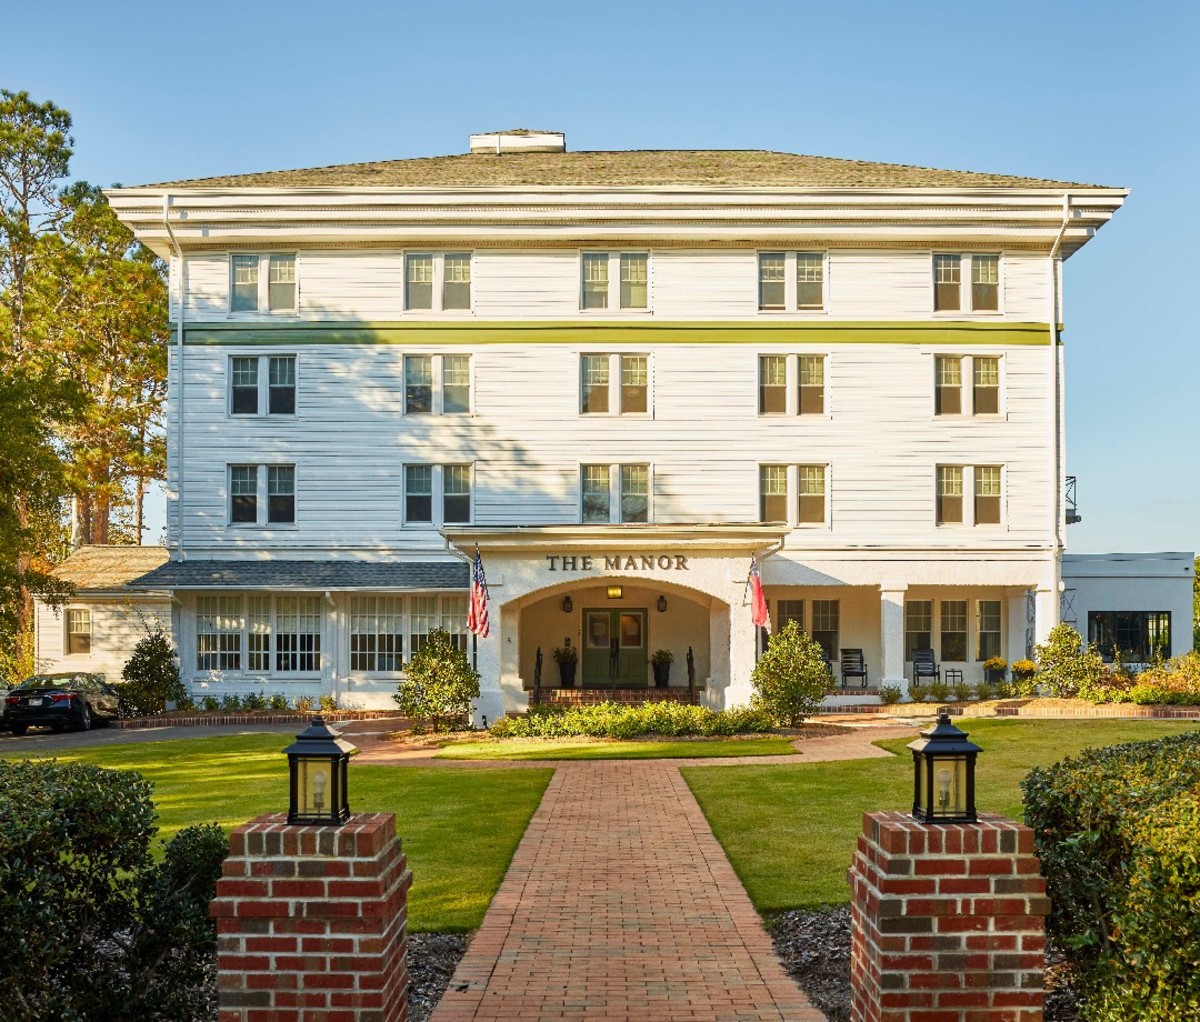 Front exterior image of The Manor, the oldest hotel in Pinehurst